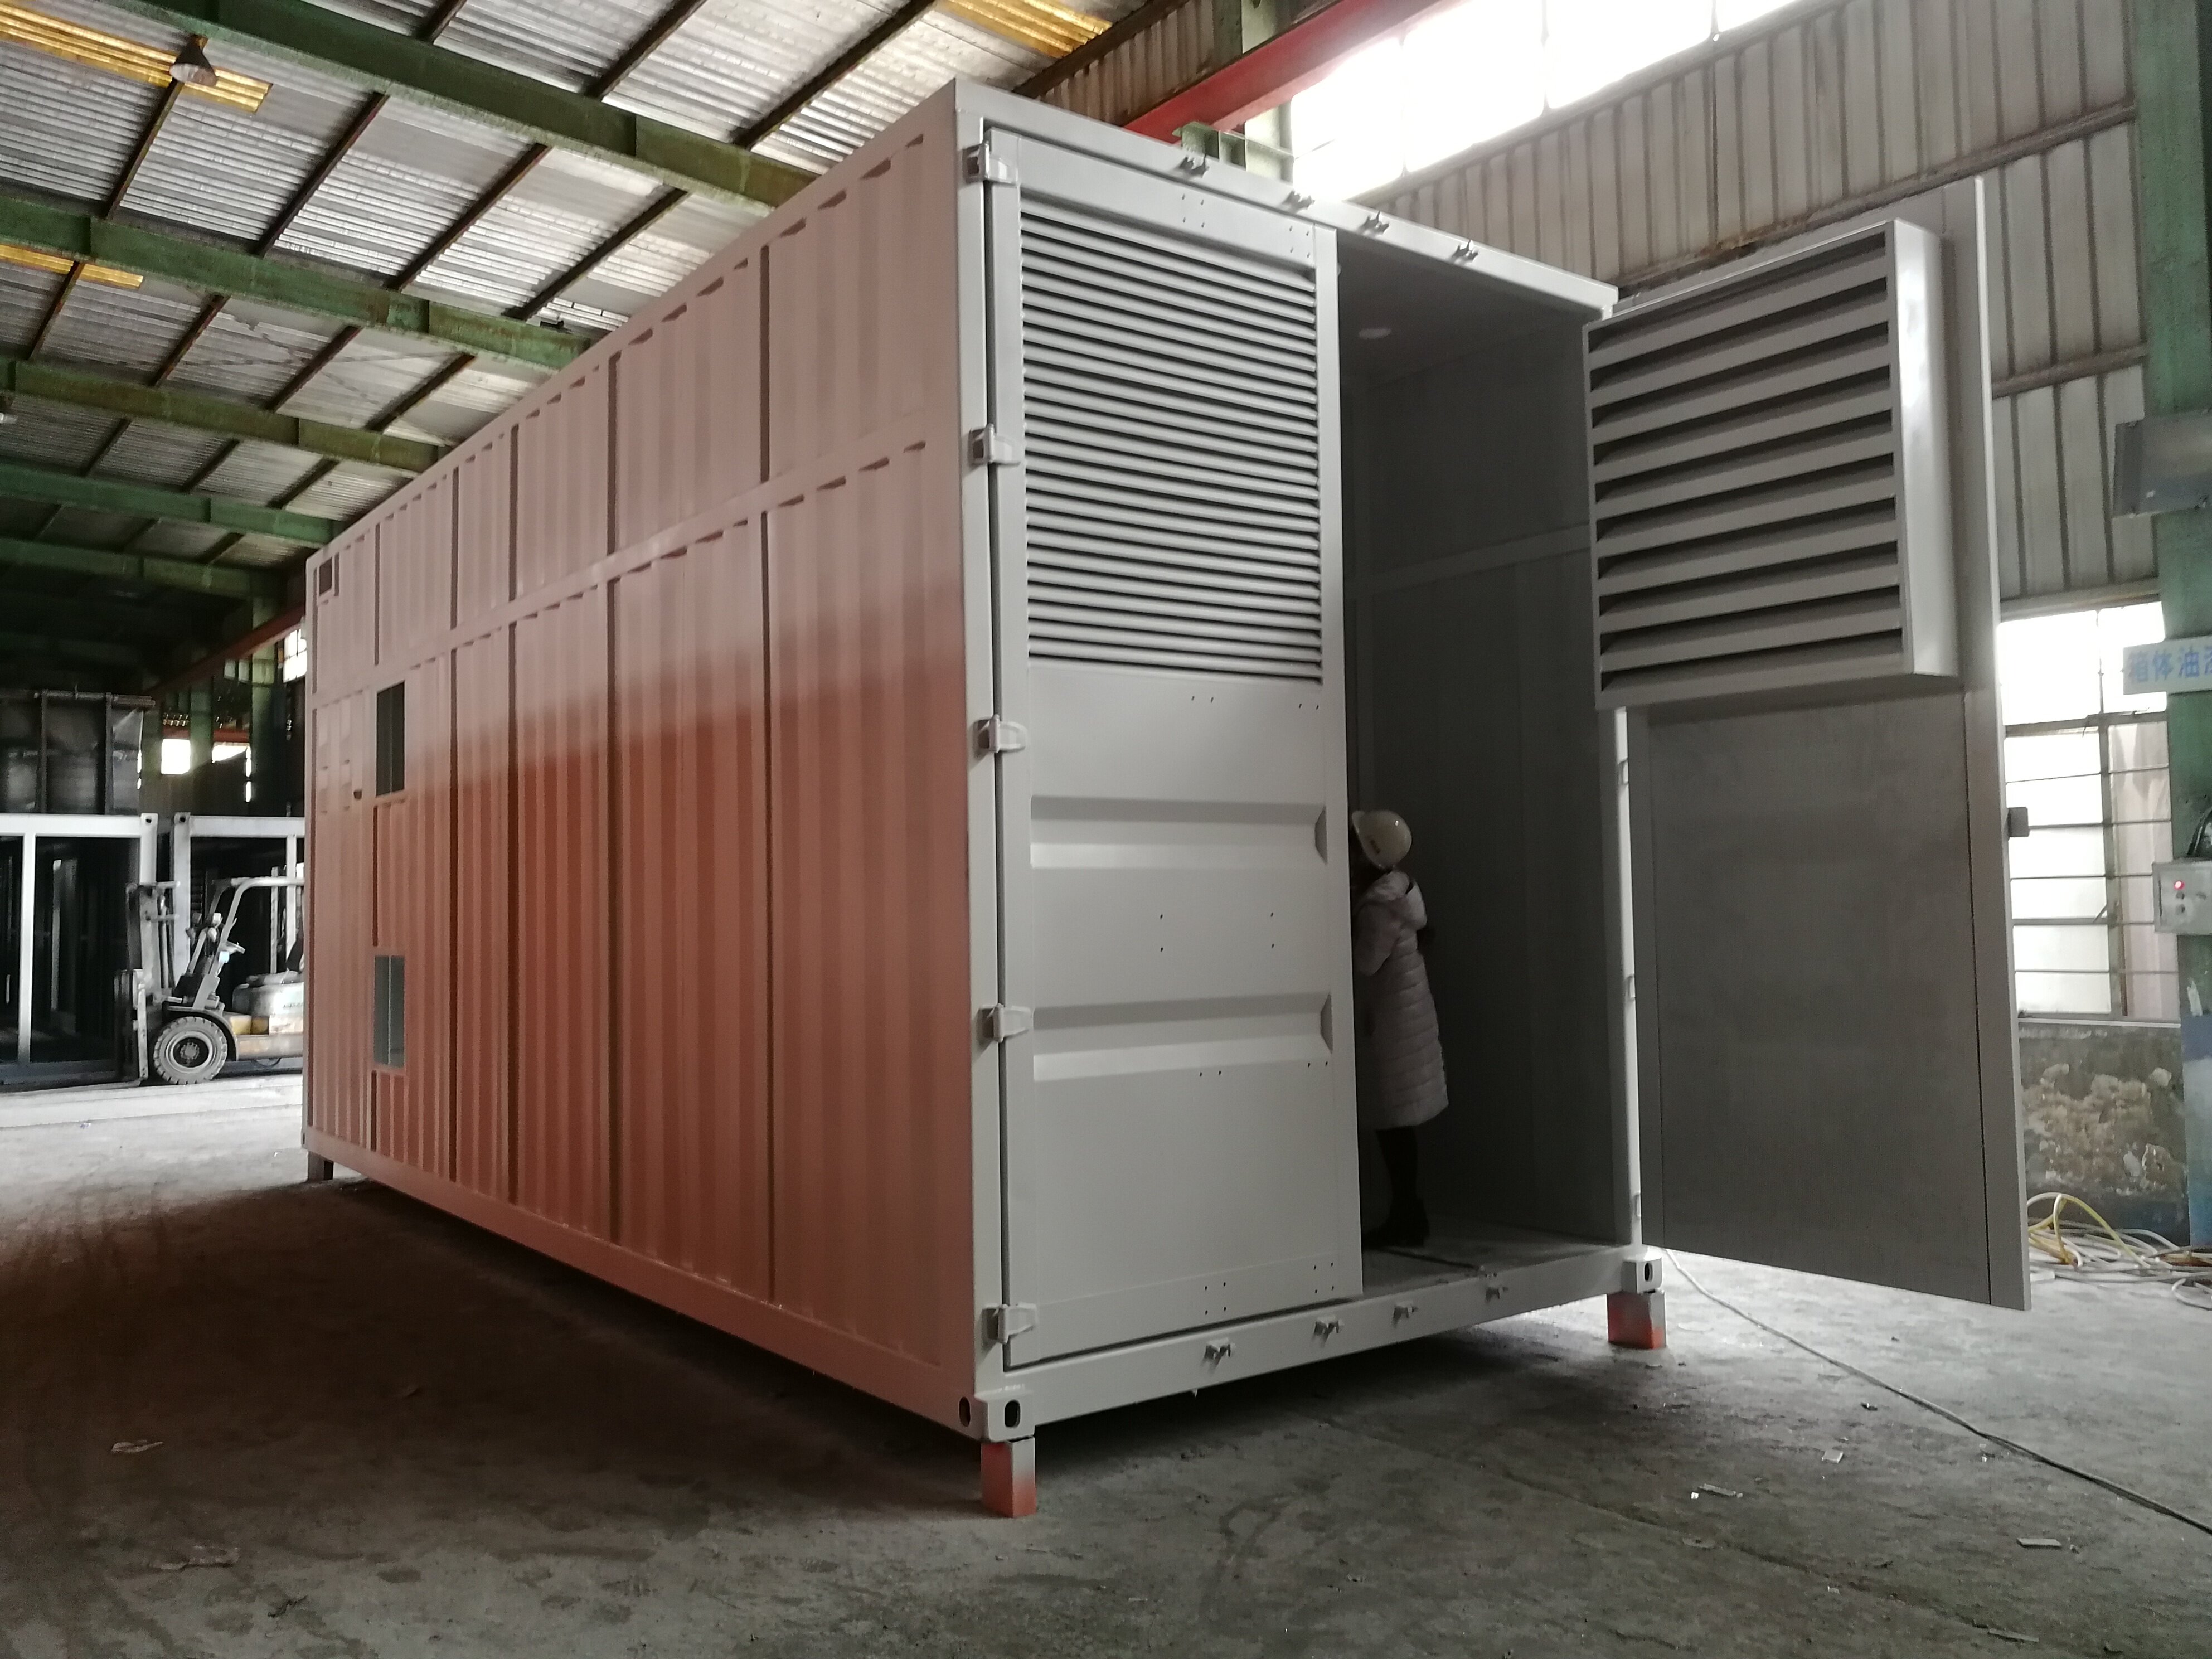 40ft energy storage container factory, 40ft energy storage container supplier, 40ft energy storage container company, 40ft energy storage container exporter, 40ft energy storage container wholesaler